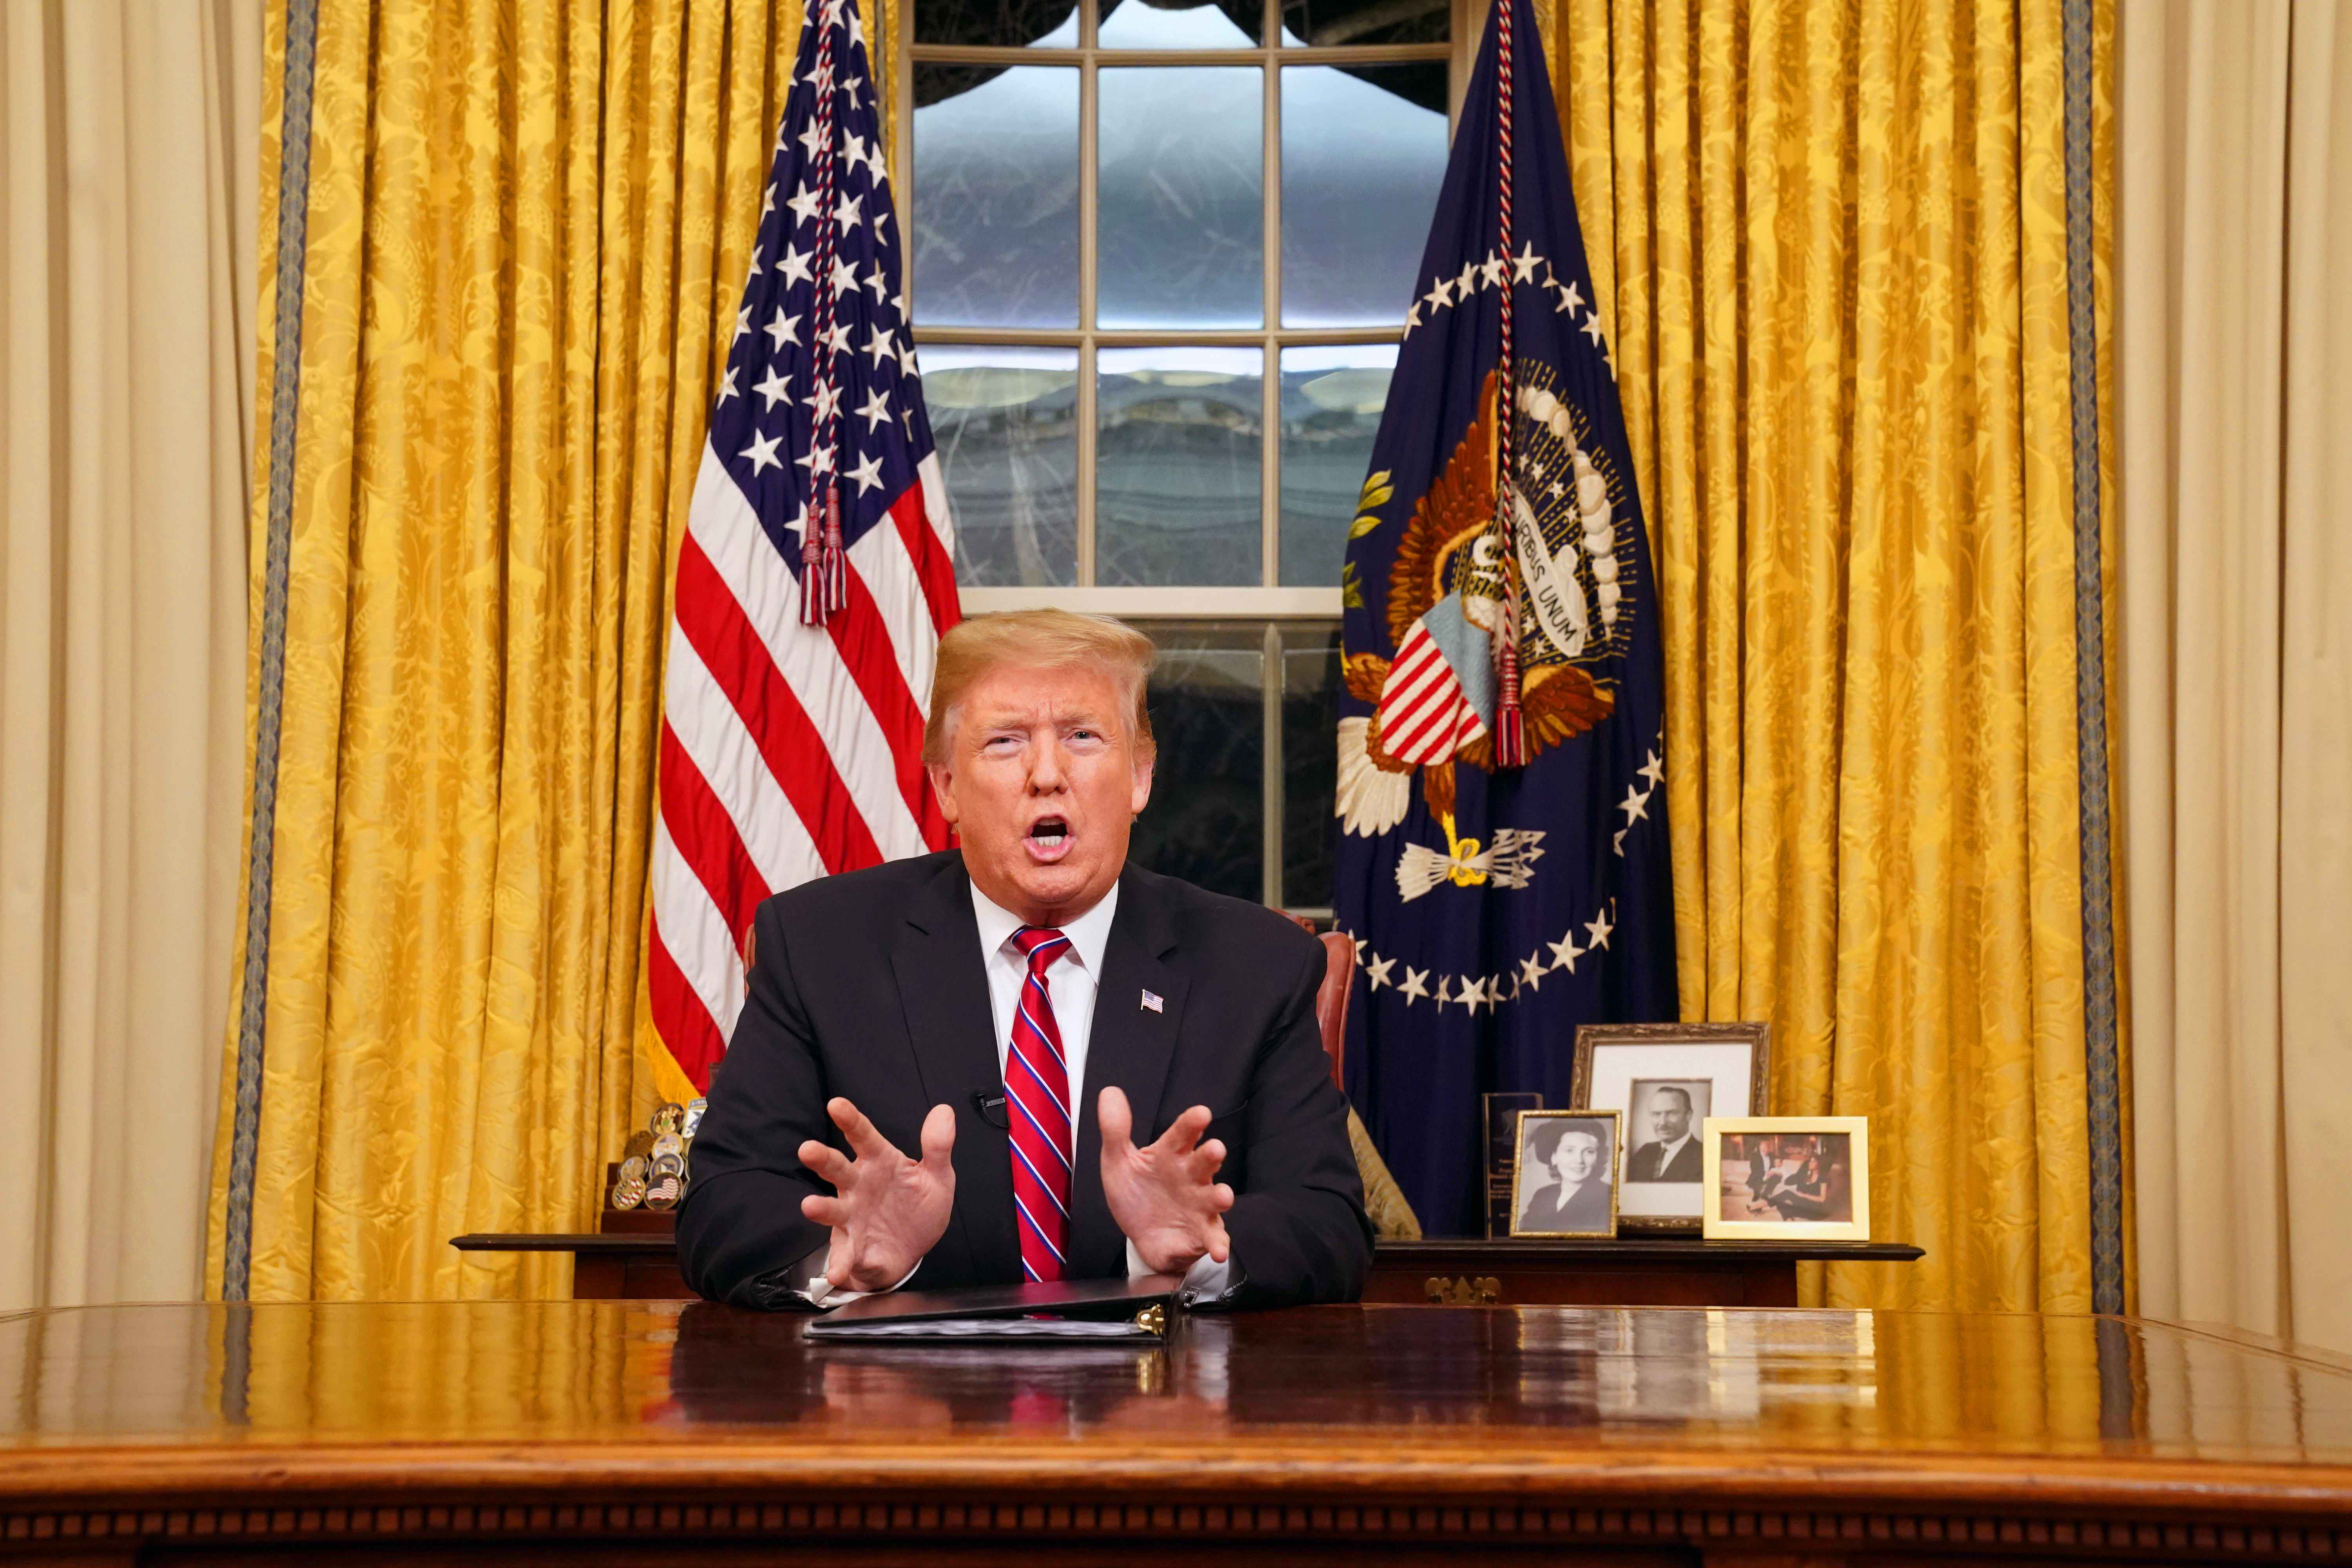 In front of his collection of military challenge coins, a portrait of his mother Mary Anne Trump, his father Fred Trump and his wife Melania and their son Barron, the U.S. President Donald Trump delivers a televised address to the nation from his desk in the Oval Office about immigration and the southern U.S. border on the 18th day of a partial government shutdown at the White House in Washington, U.S., January 8, 2019.